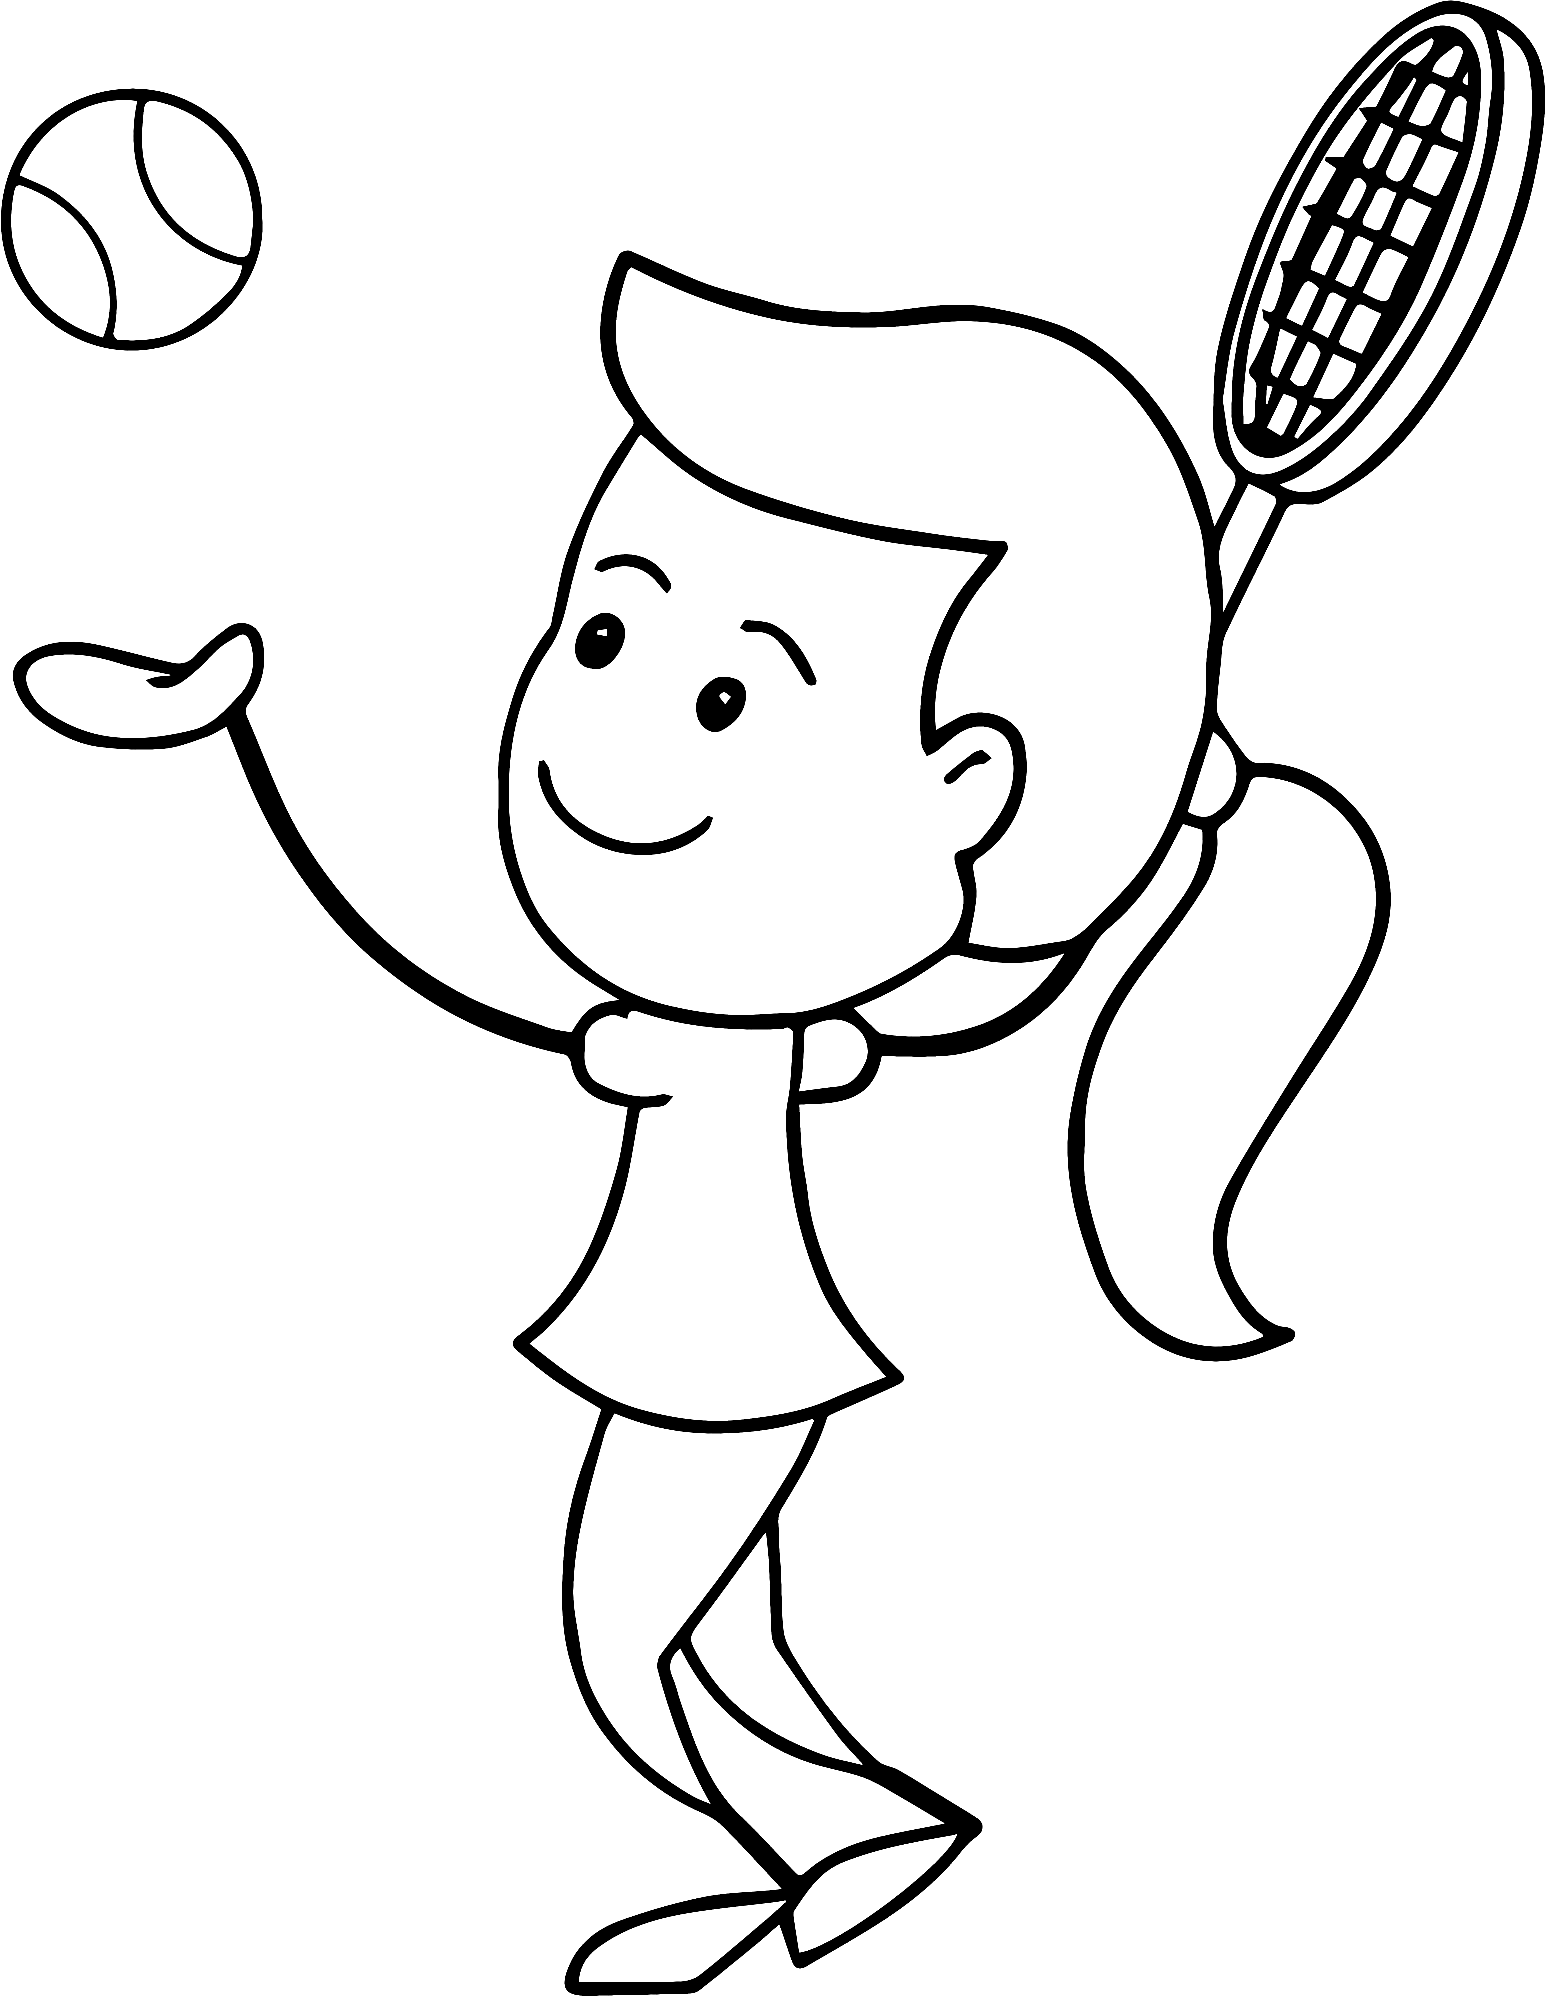 Girl Serving Tennis Ball Coloring Page